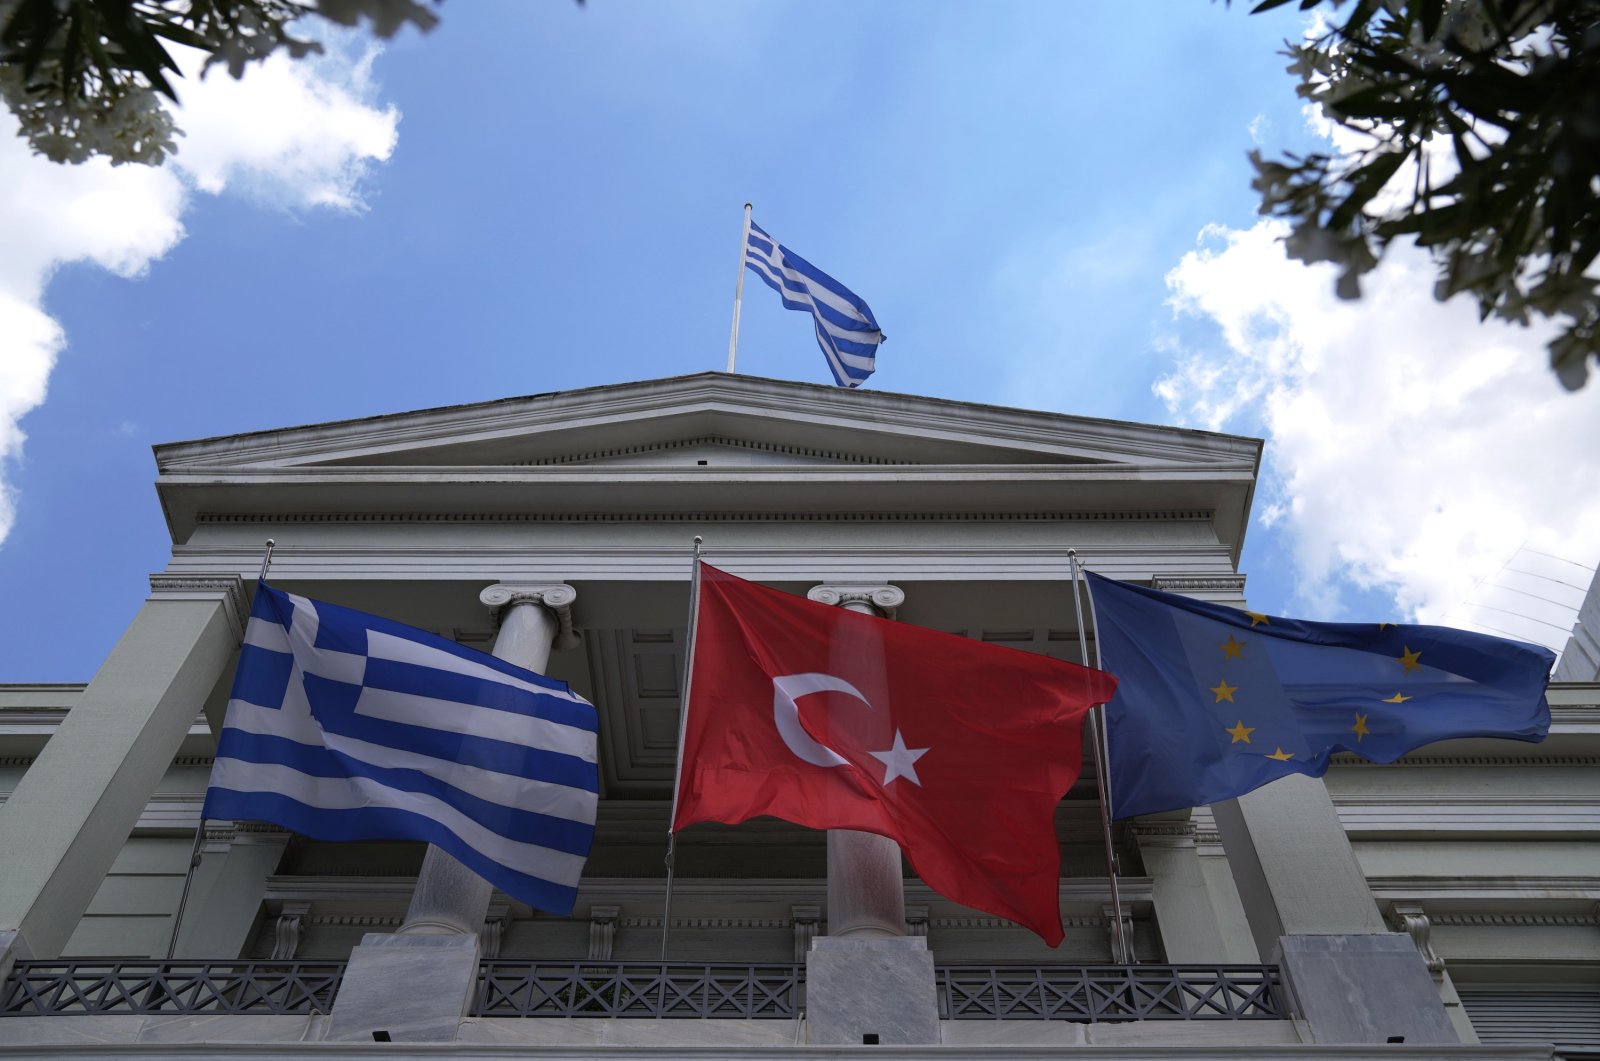 Greek, (Left) Turkish (Center) and European Union (Right) flags fluttering at the foreign ministry house before a meeting between Greek Foreign Minister Nikos Dendias and his Turkish counterpart Mevlüt Çavuşoğlu in Athens, Greece, May 31, 2021. (AP File Photo)